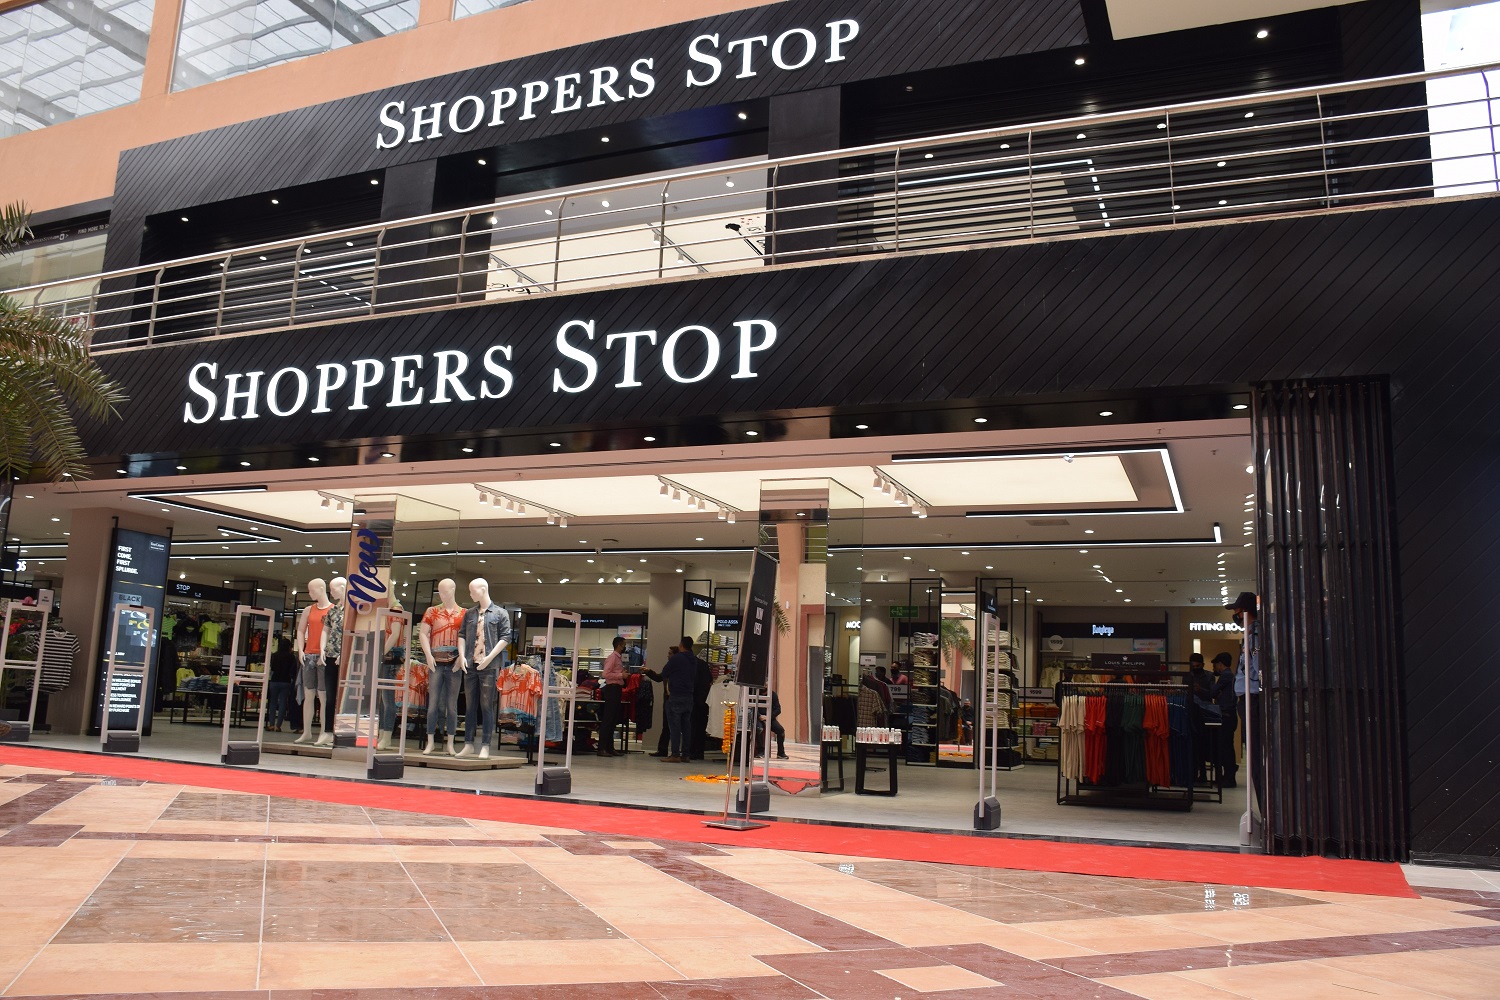 shoppers-stop-bets-big-on-expansion-opens-5-new-stores